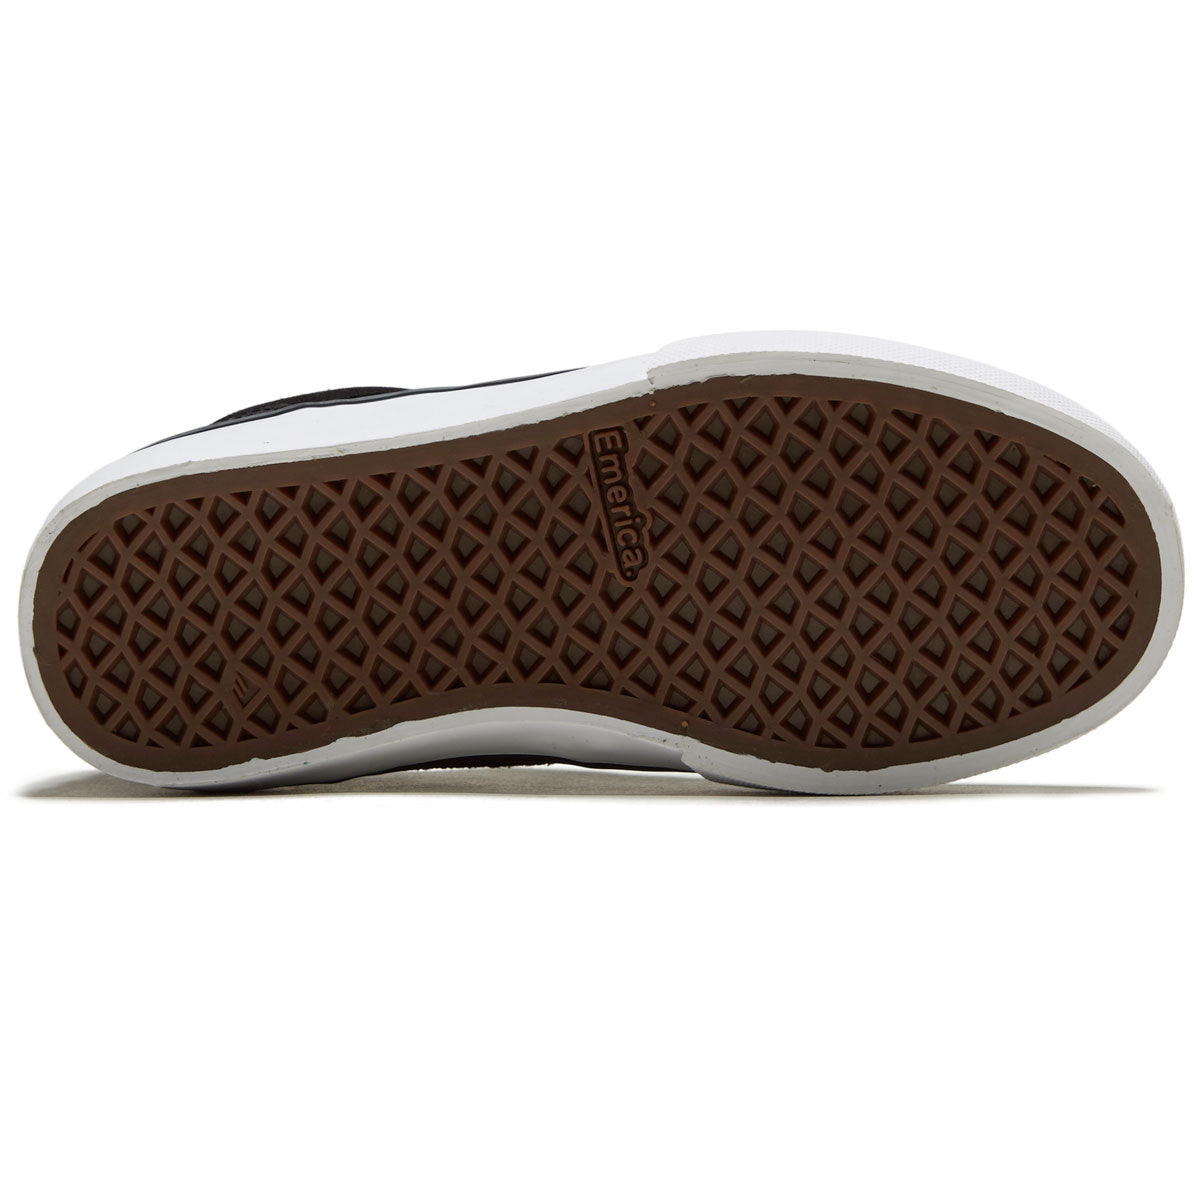 Emerica Youth The Low Vulc Shoes - Black/White/Gum image 4